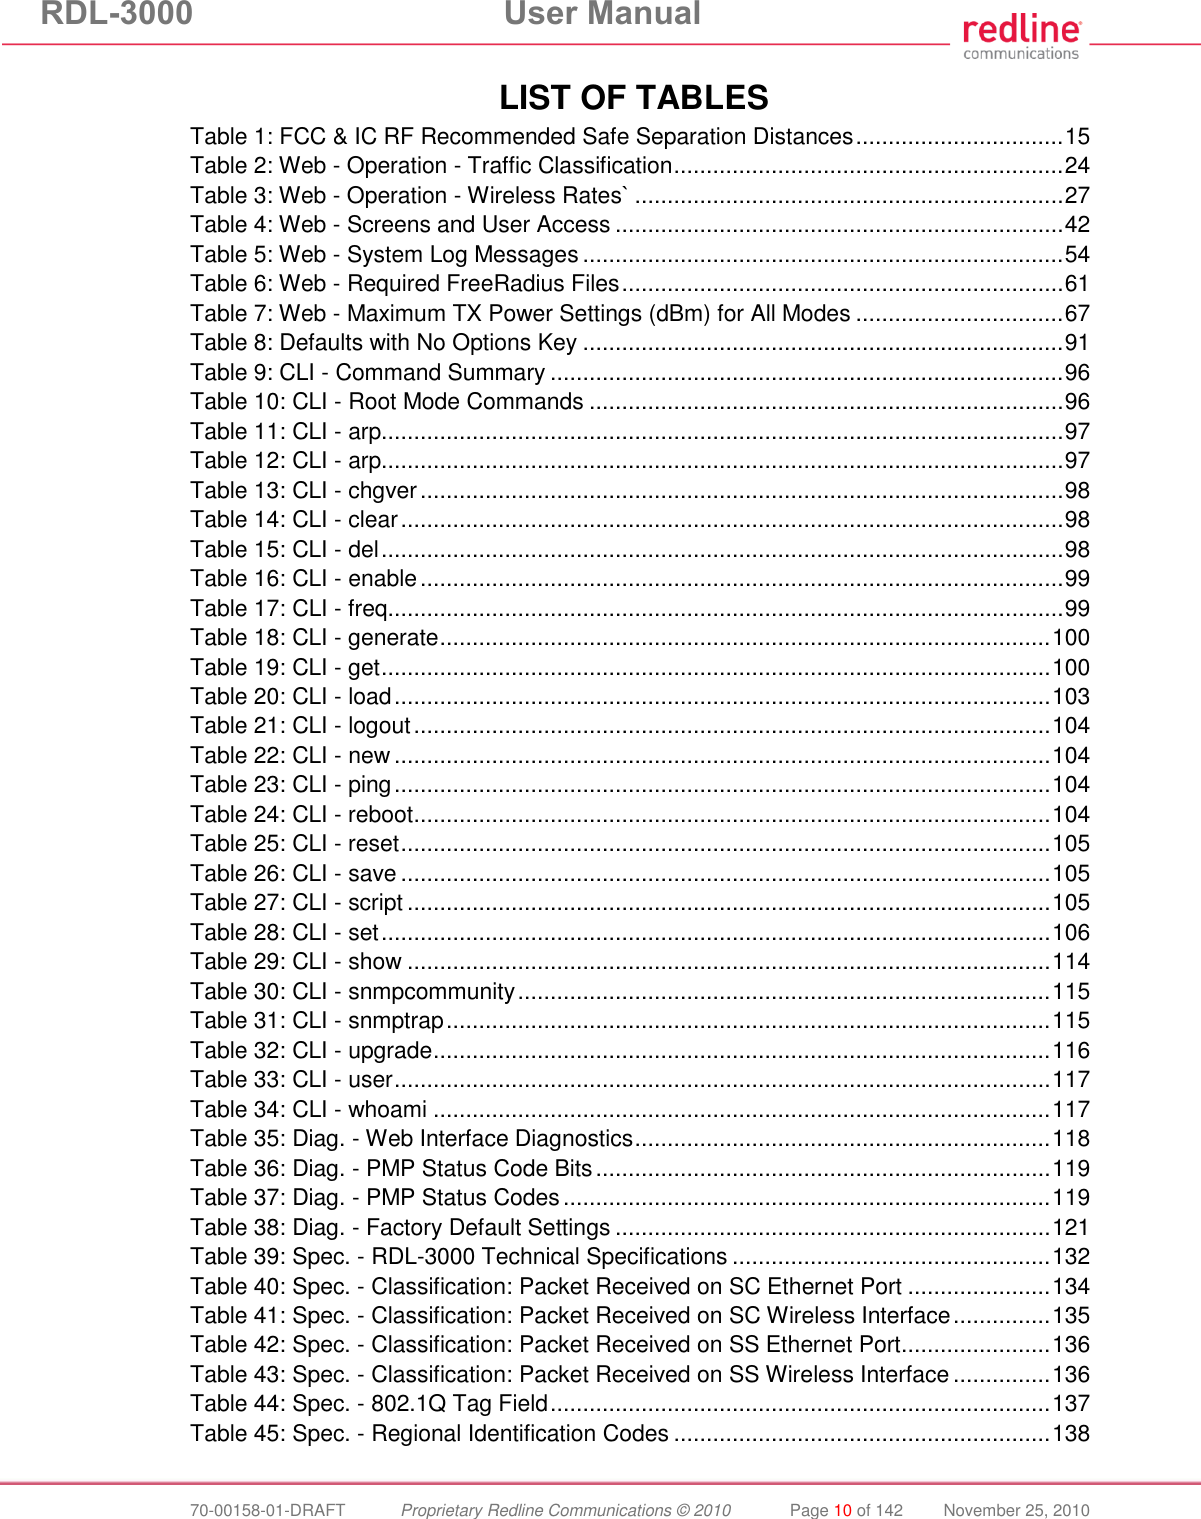 RDL-3000  User Manual  70-00158-01-DRAFT  Proprietary Redline Communications © 2010  Page 10 of 142  November 25, 2010  LIST OF TABLES Table 1: FCC &amp; IC RF Recommended Safe Separation Distances ................................ 15 Table 2: Web - Operation - Traffic Classification ............................................................ 24 Table 3: Web - Operation - Wireless Rates` .................................................................. 27 Table 4: Web - Screens and User Access ..................................................................... 42 Table 5: Web - System Log Messages .......................................................................... 54 Table 6: Web - Required FreeRadius Files .................................................................... 61 Table 7: Web - Maximum TX Power Settings (dBm) for All Modes ................................ 67 Table 8: Defaults with No Options Key .......................................................................... 91 Table 9: CLI - Command Summary ............................................................................... 96 Table 10: CLI - Root Mode Commands ......................................................................... 96 Table 11: CLI - arp......................................................................................................... 97 Table 12: CLI - arp......................................................................................................... 97 Table 13: CLI - chgver ................................................................................................... 98 Table 14: CLI - clear ...................................................................................................... 98 Table 15: CLI - del ......................................................................................................... 98 Table 16: CLI - enable ................................................................................................... 99 Table 17: CLI - freq........................................................................................................ 99 Table 18: CLI - generate .............................................................................................. 100 Table 19: CLI - get ....................................................................................................... 100 Table 20: CLI - load ..................................................................................................... 103 Table 21: CLI - logout .................................................................................................. 104 Table 22: CLI - new ..................................................................................................... 104 Table 23: CLI - ping ..................................................................................................... 104 Table 24: CLI - reboot .................................................................................................. 104 Table 25: CLI - reset .................................................................................................... 105 Table 26: CLI - save .................................................................................................... 105 Table 27: CLI - script ................................................................................................... 105 Table 28: CLI - set ....................................................................................................... 106 Table 29: CLI - show ................................................................................................... 114 Table 30: CLI - snmpcommunity .................................................................................. 115 Table 31: CLI - snmptrap ............................................................................................. 115 Table 32: CLI - upgrade ............................................................................................... 116 Table 33: CLI - user ..................................................................................................... 117 Table 34: CLI - whoami ............................................................................................... 117 Table 35: Diag. - Web Interface Diagnostics ................................................................ 118 Table 36: Diag. - PMP Status Code Bits ...................................................................... 119 Table 37: Diag. - PMP Status Codes ........................................................................... 119 Table 38: Diag. - Factory Default Settings ................................................................... 121 Table 39: Spec. - RDL-3000 Technical Specifications ................................................. 132 Table 40: Spec. - Classification: Packet Received on SC Ethernet Port ...................... 134 Table 41: Spec. - Classification: Packet Received on SC Wireless Interface ............... 135 Table 42: Spec. - Classification: Packet Received on SS Ethernet Port ....................... 136 Table 43: Spec. - Classification: Packet Received on SS Wireless Interface ............... 136 Table 44: Spec. - 802.1Q Tag Field ............................................................................. 137 Table 45: Spec. - Regional Identification Codes .......................................................... 138 